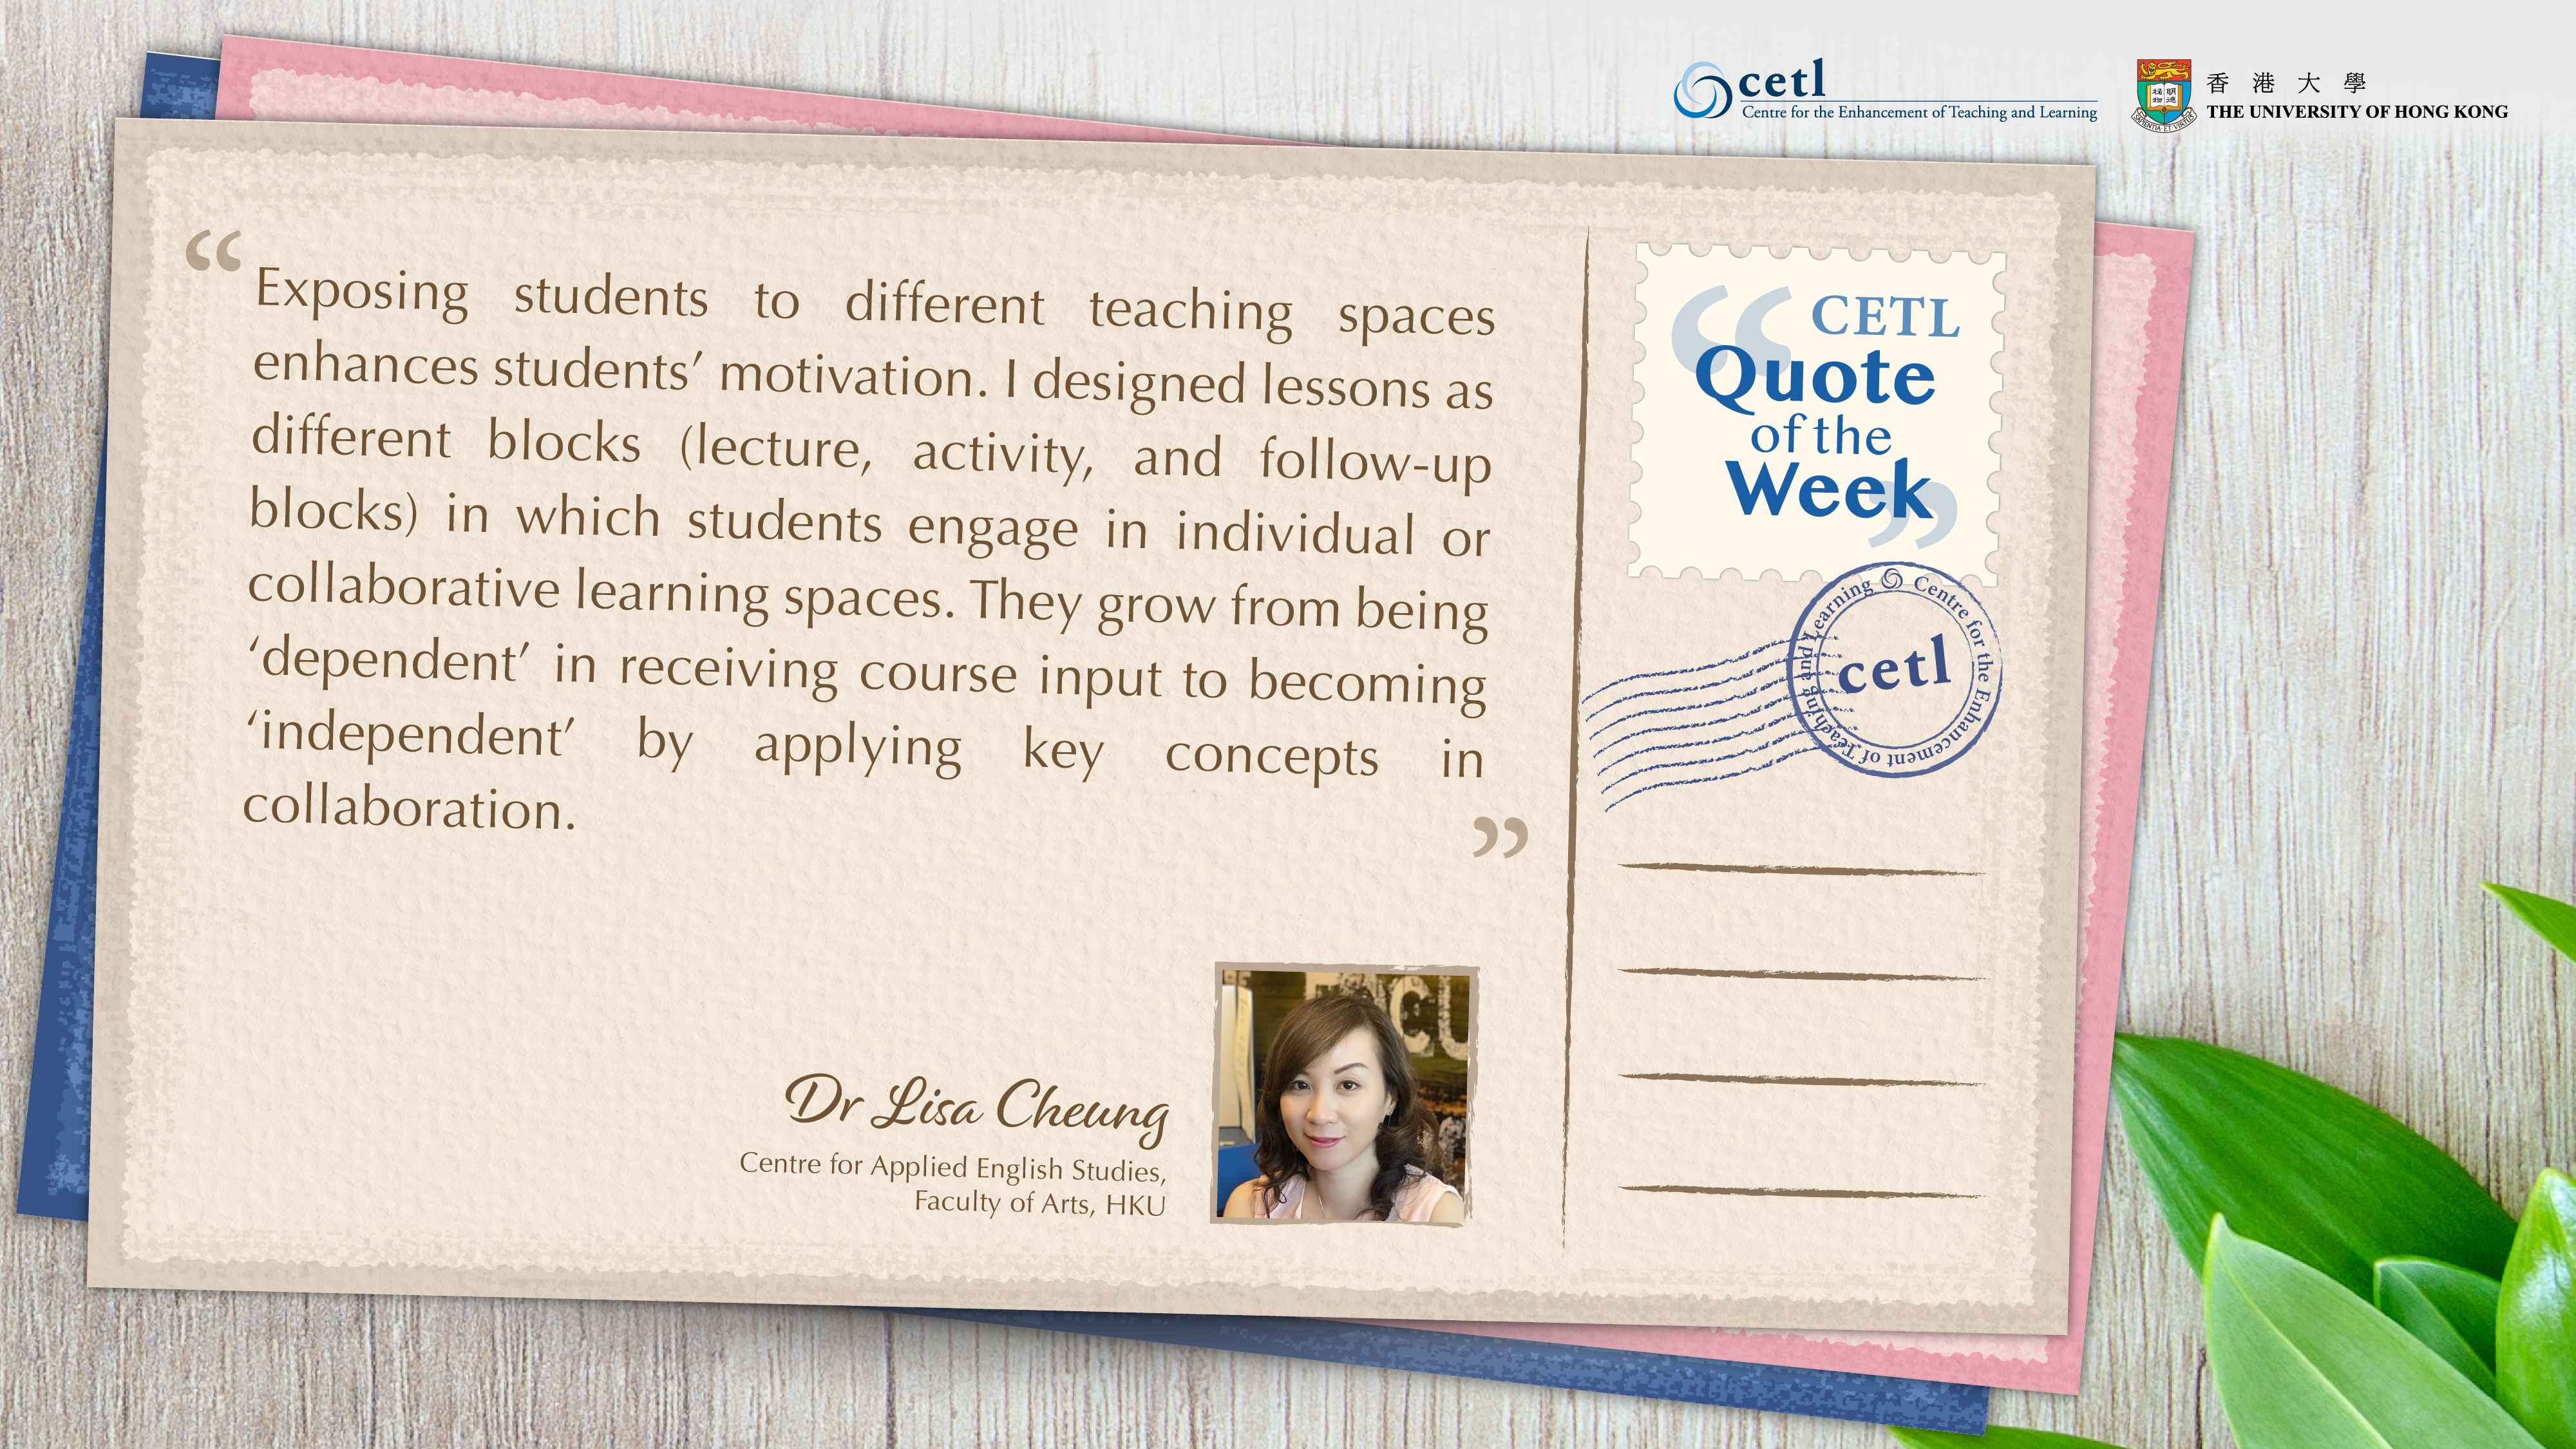 Quote from Dr. Lisa Cheung